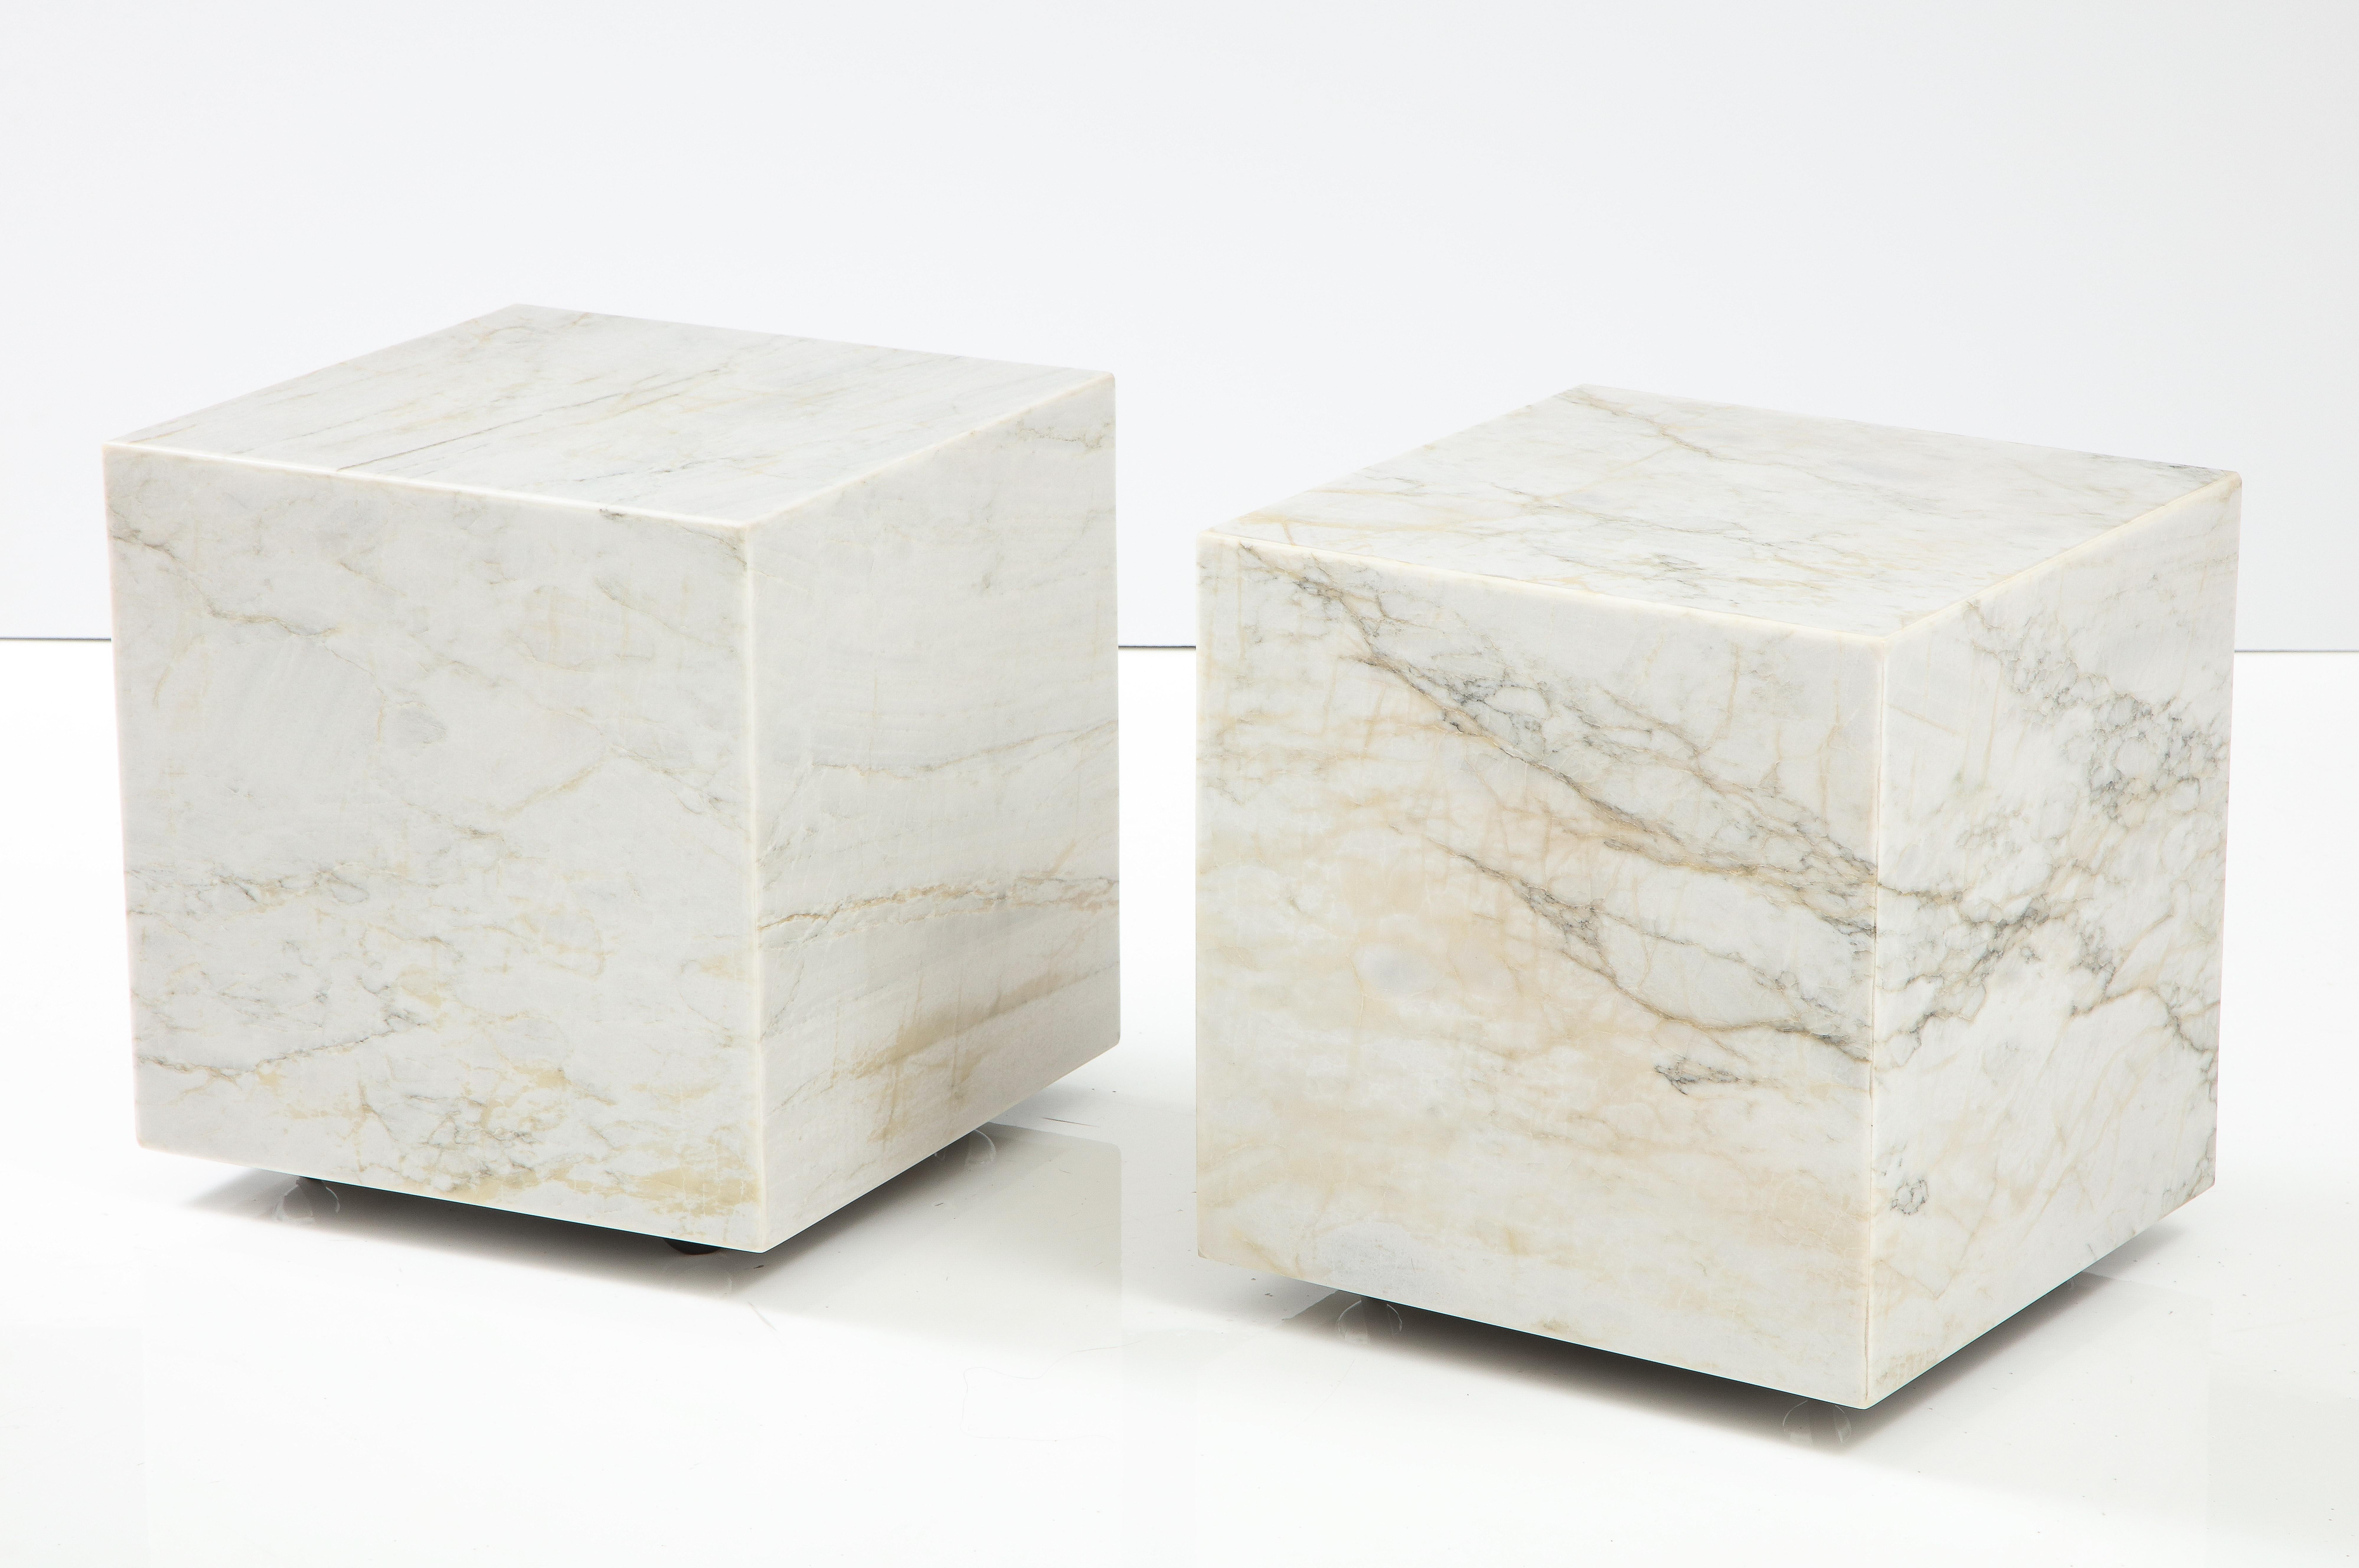 Pair of white marble cube tables.
The marble has beautiful veining and they can be used separately as end tables or
joined together to form a coffee table.
The tables have new chrome casters for easy movement.